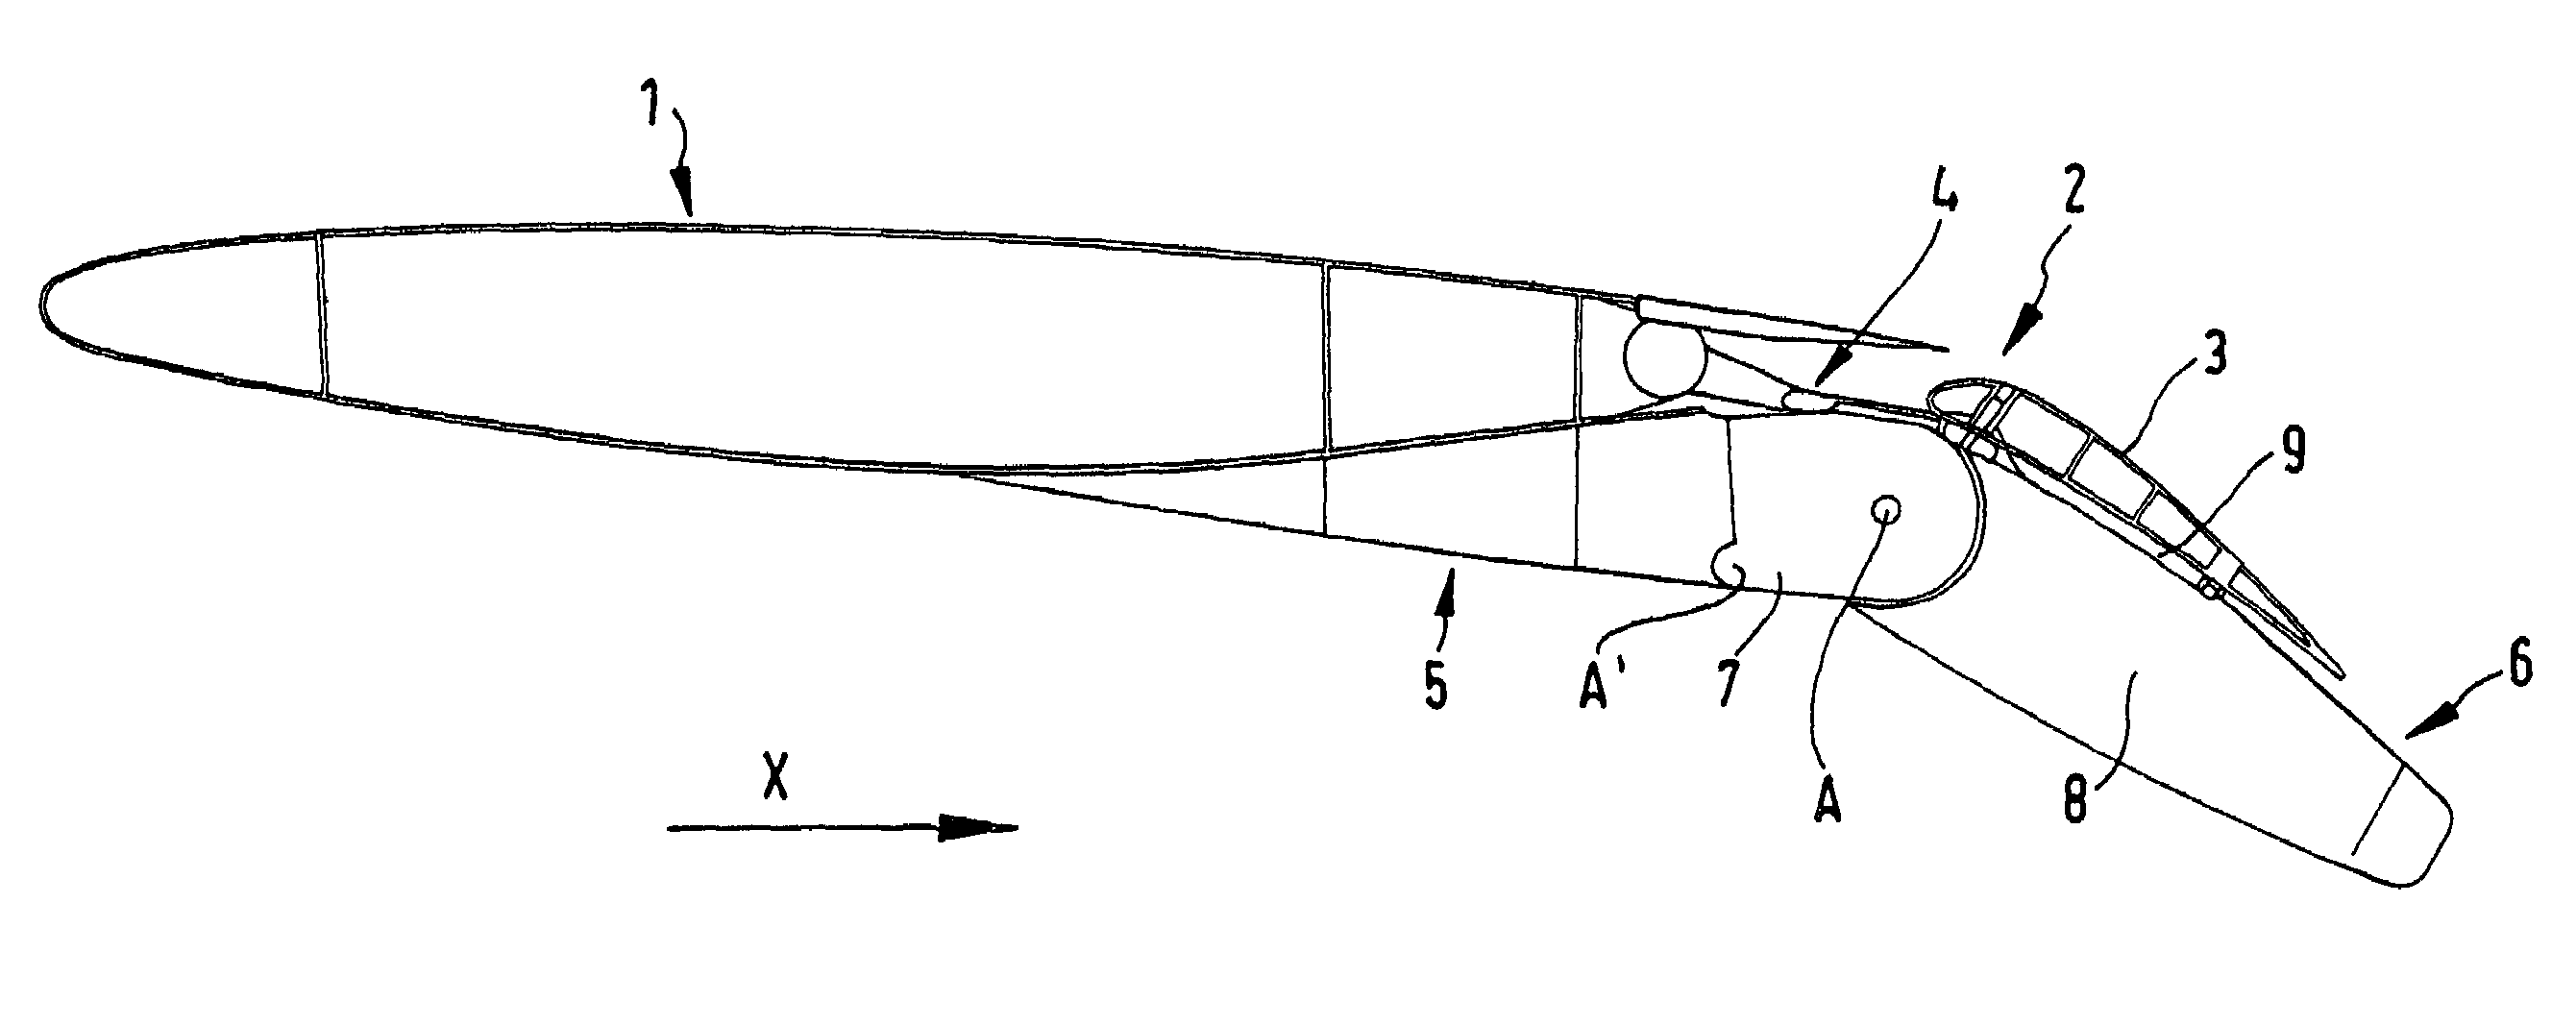 Wing with extendable aerodynamic pivoted flaps